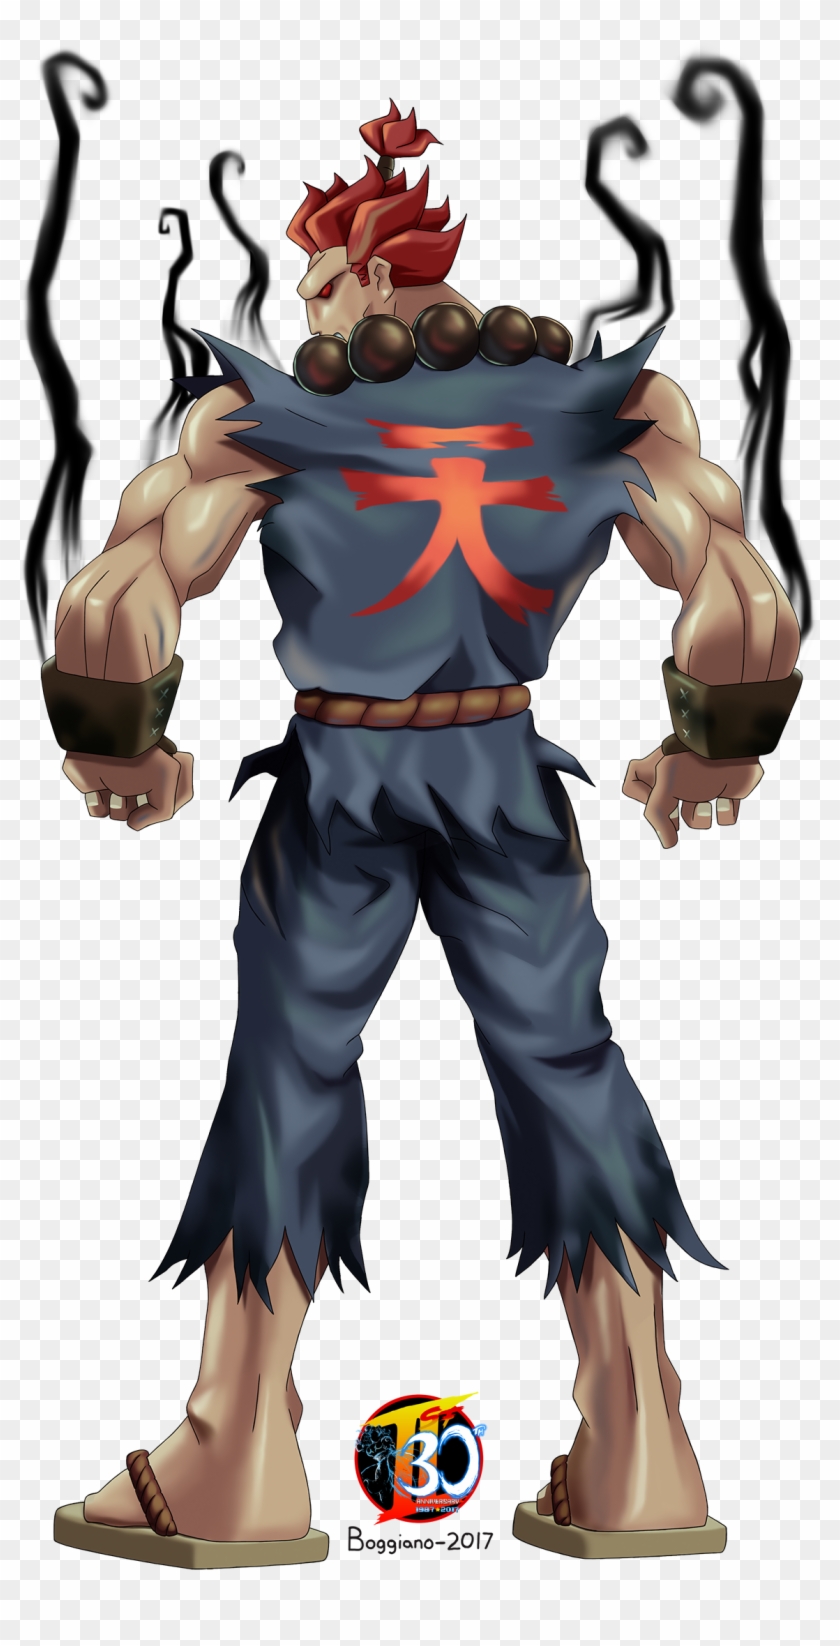 Our Street Fighter 30th Tribute - Akuma Street Fighter Bosses Clipart